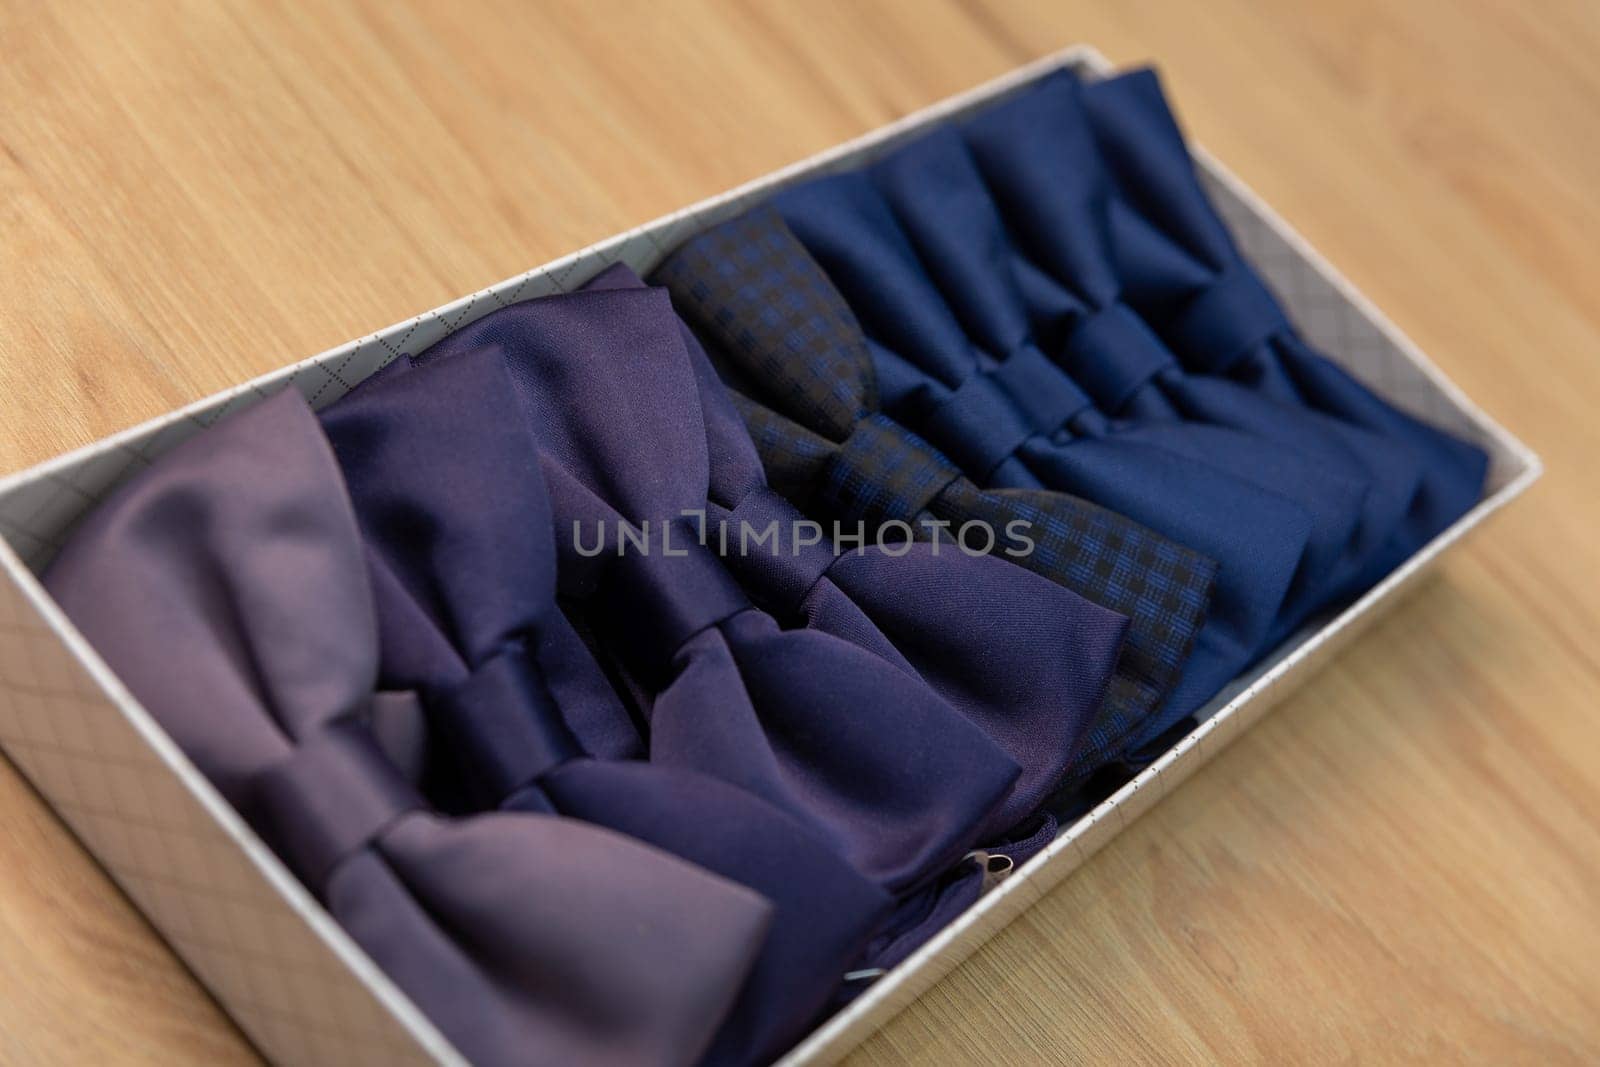 Showcase in a store with beautiful multi-colored bow ties. Many bright colorful beautiful bow ties in an box.